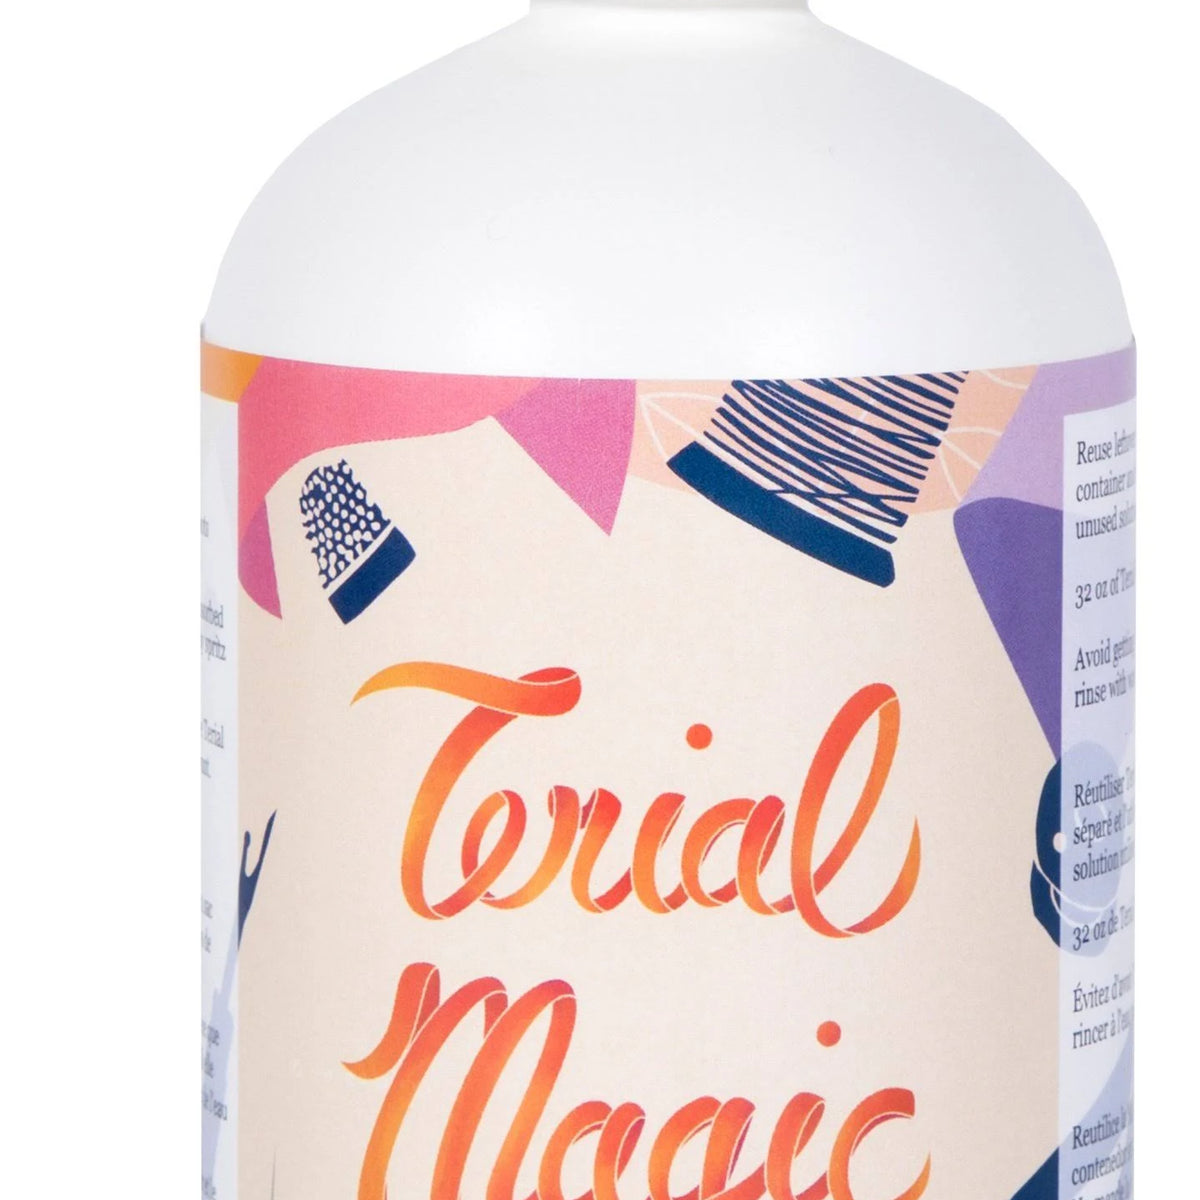 Machine Embroidery Using Terial Magic - No other stabilizer required! 